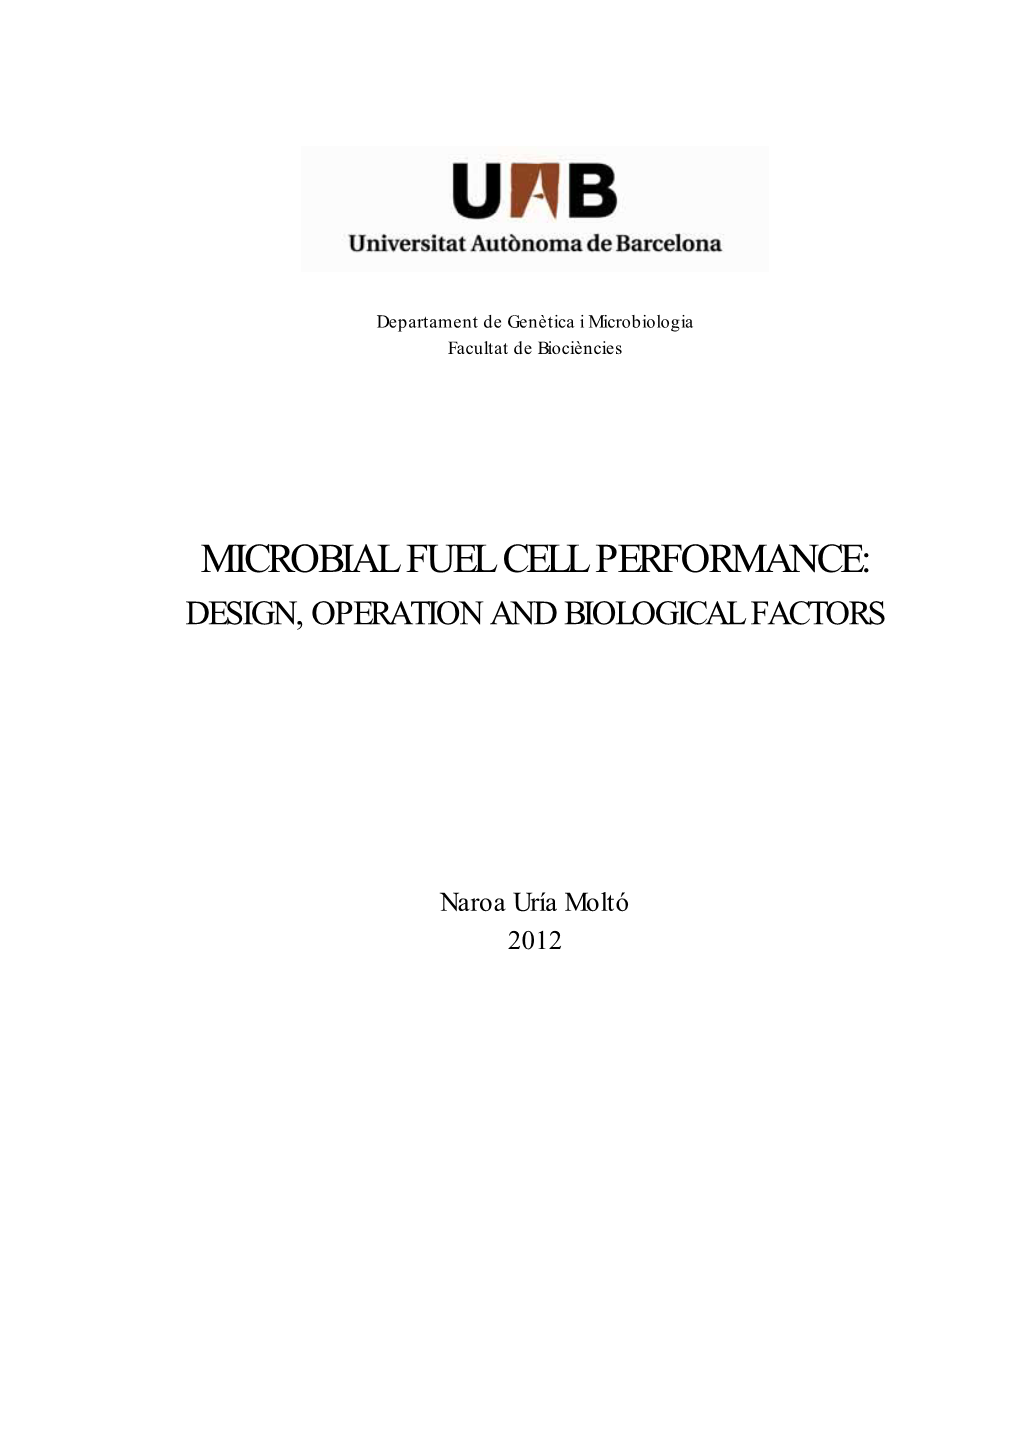 Microbial Fuel Cell Performance: Design, Operation and Biological Factors